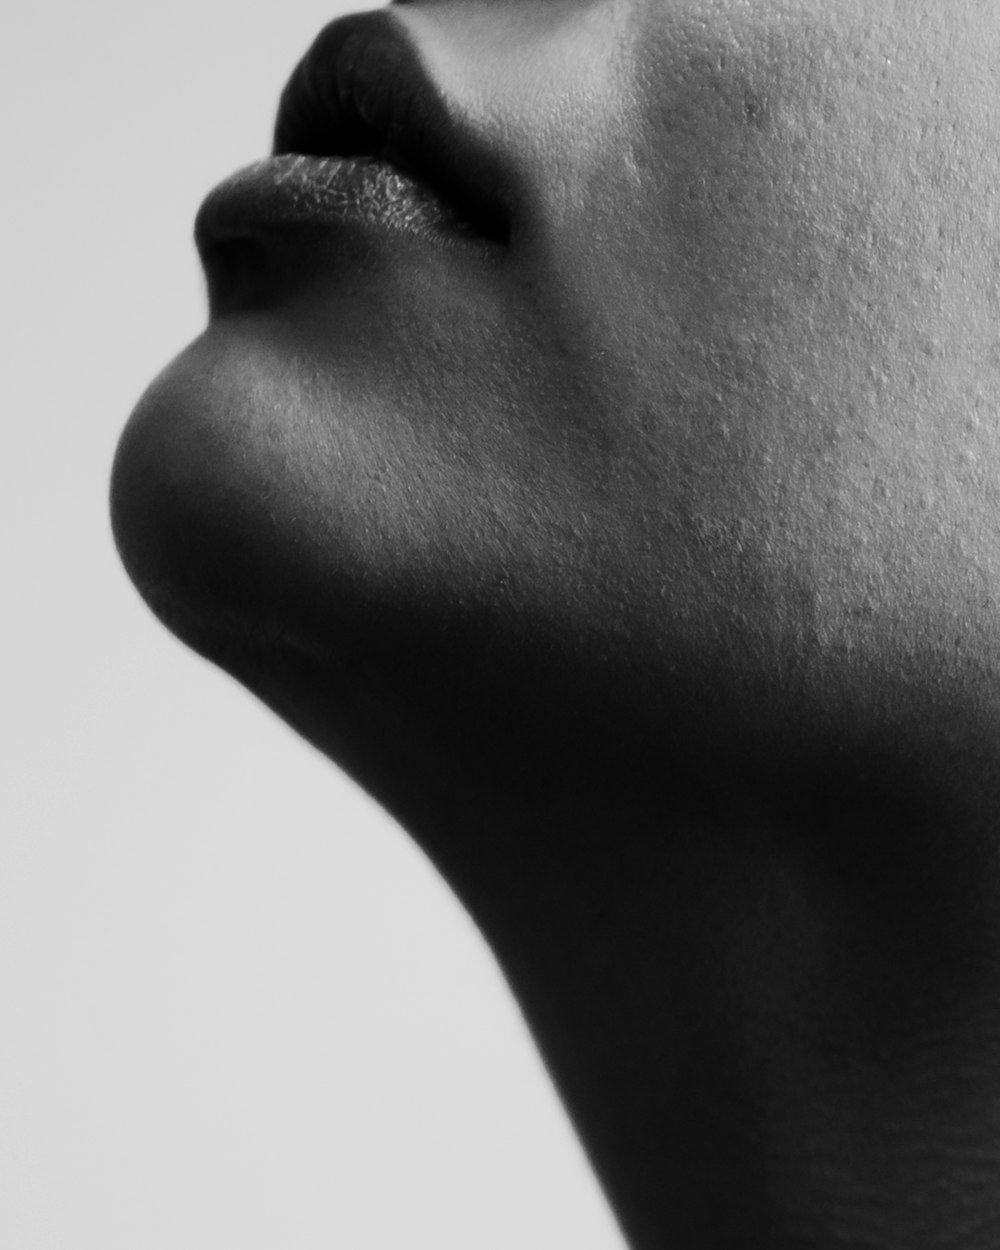 a close up of a person's lips